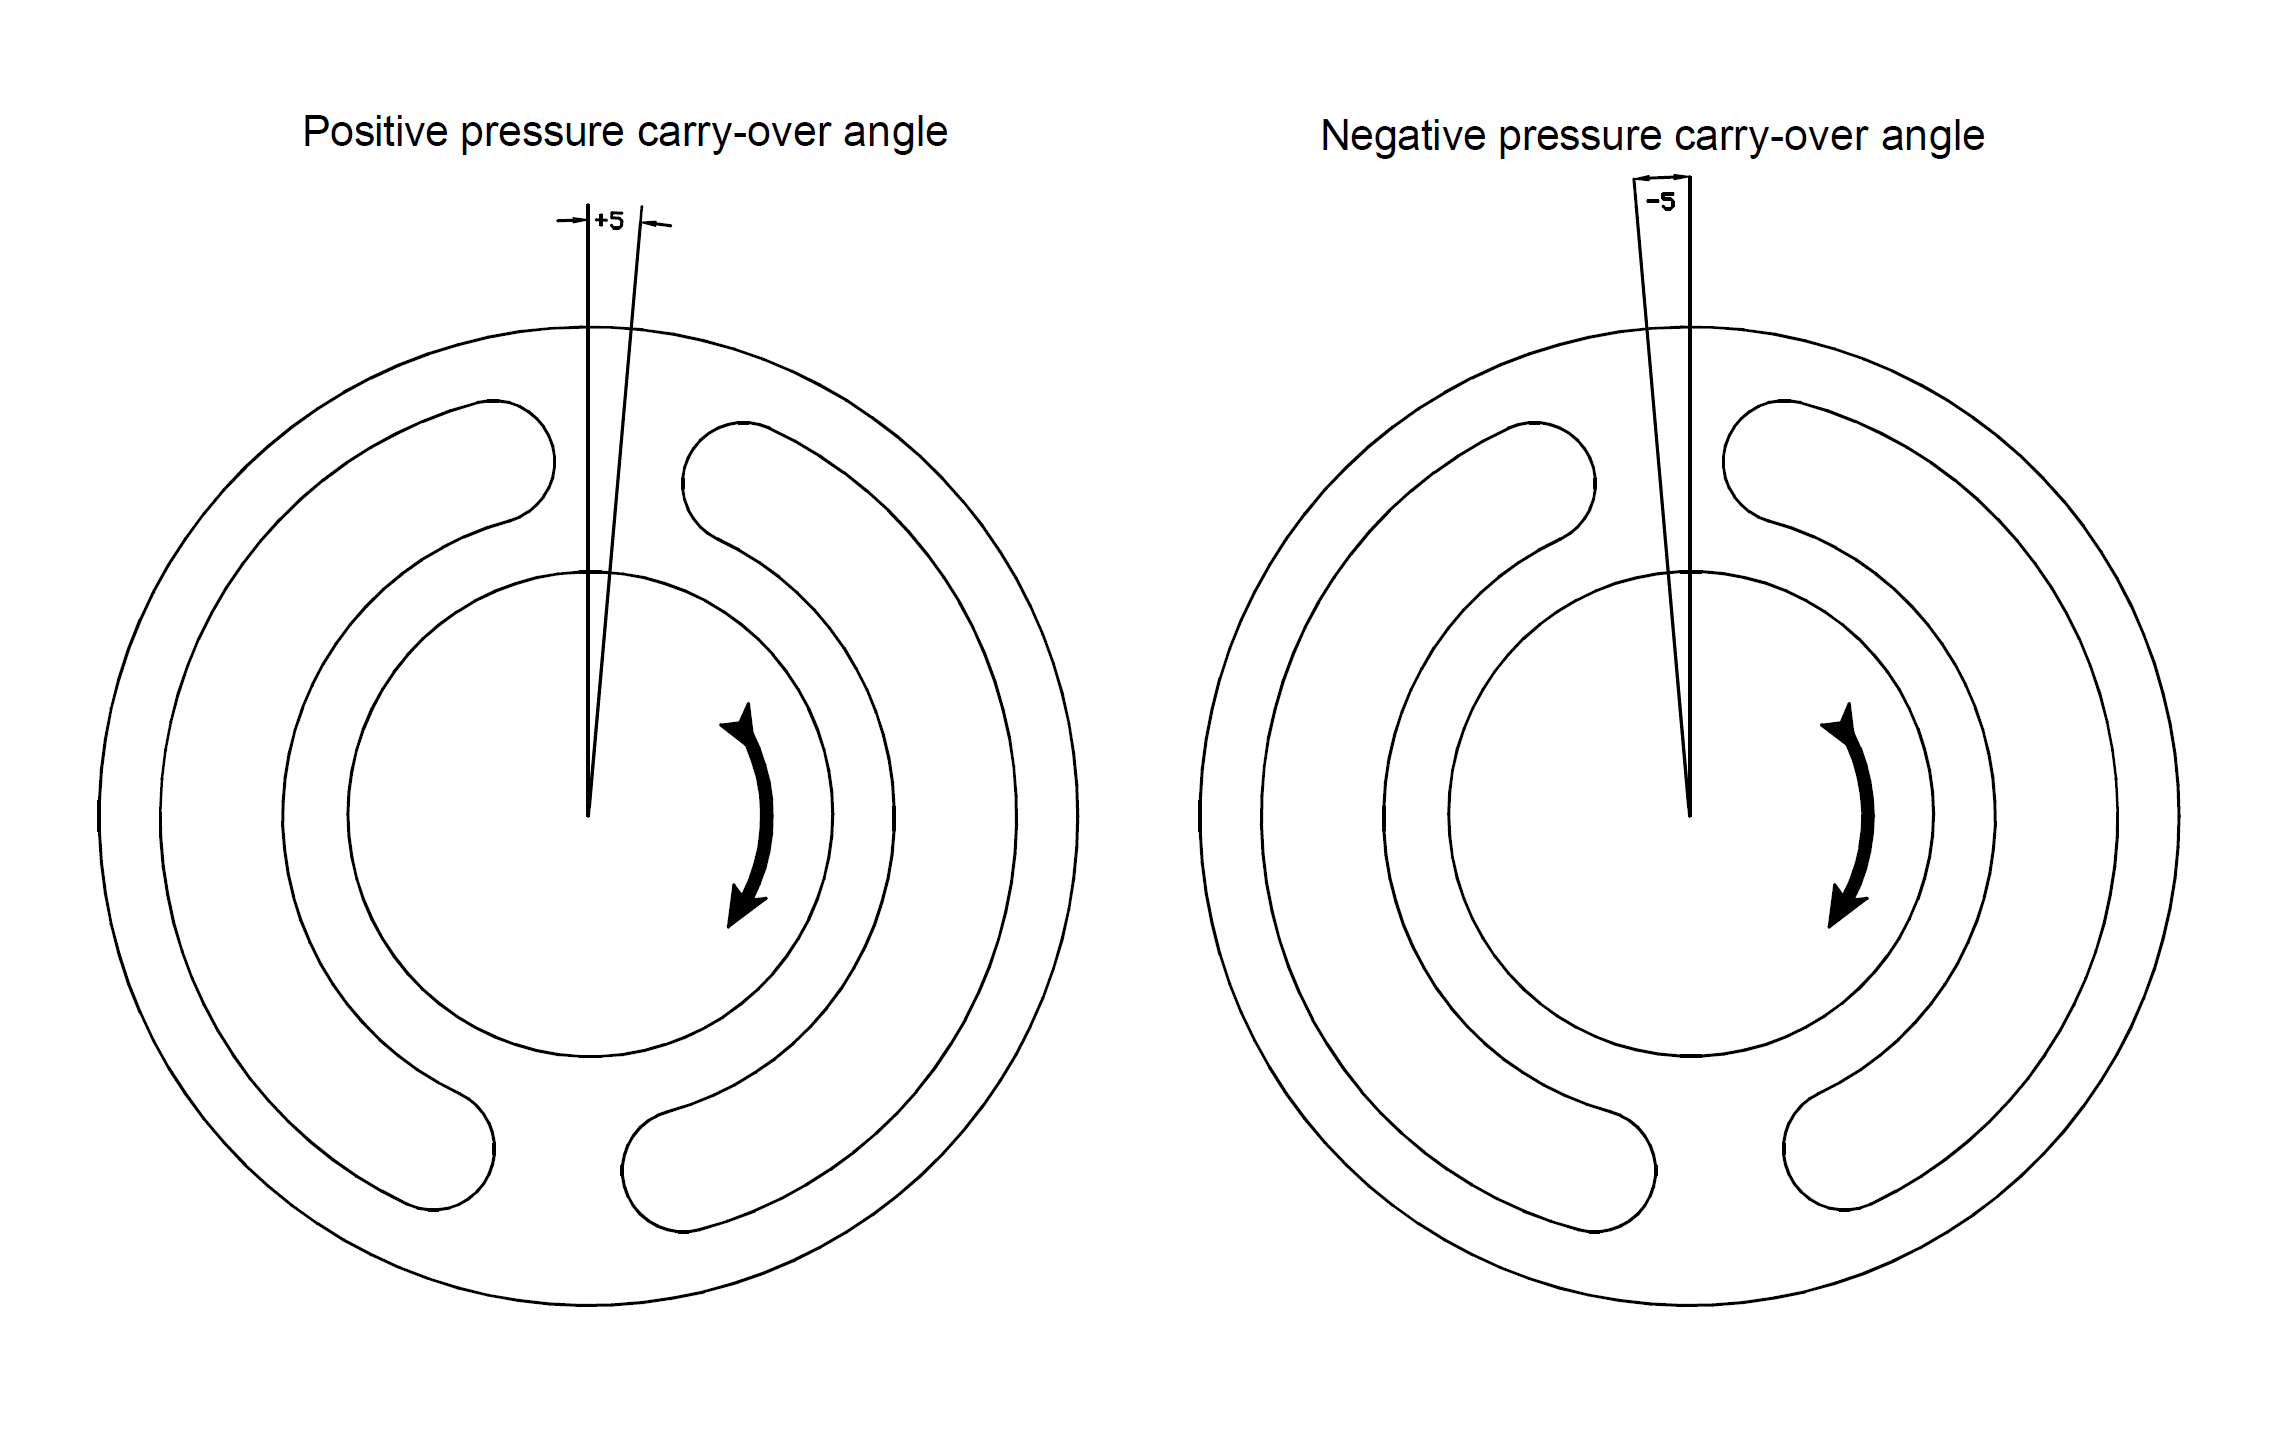 Valve plate pressure carry-over anlge (also called timing angle)